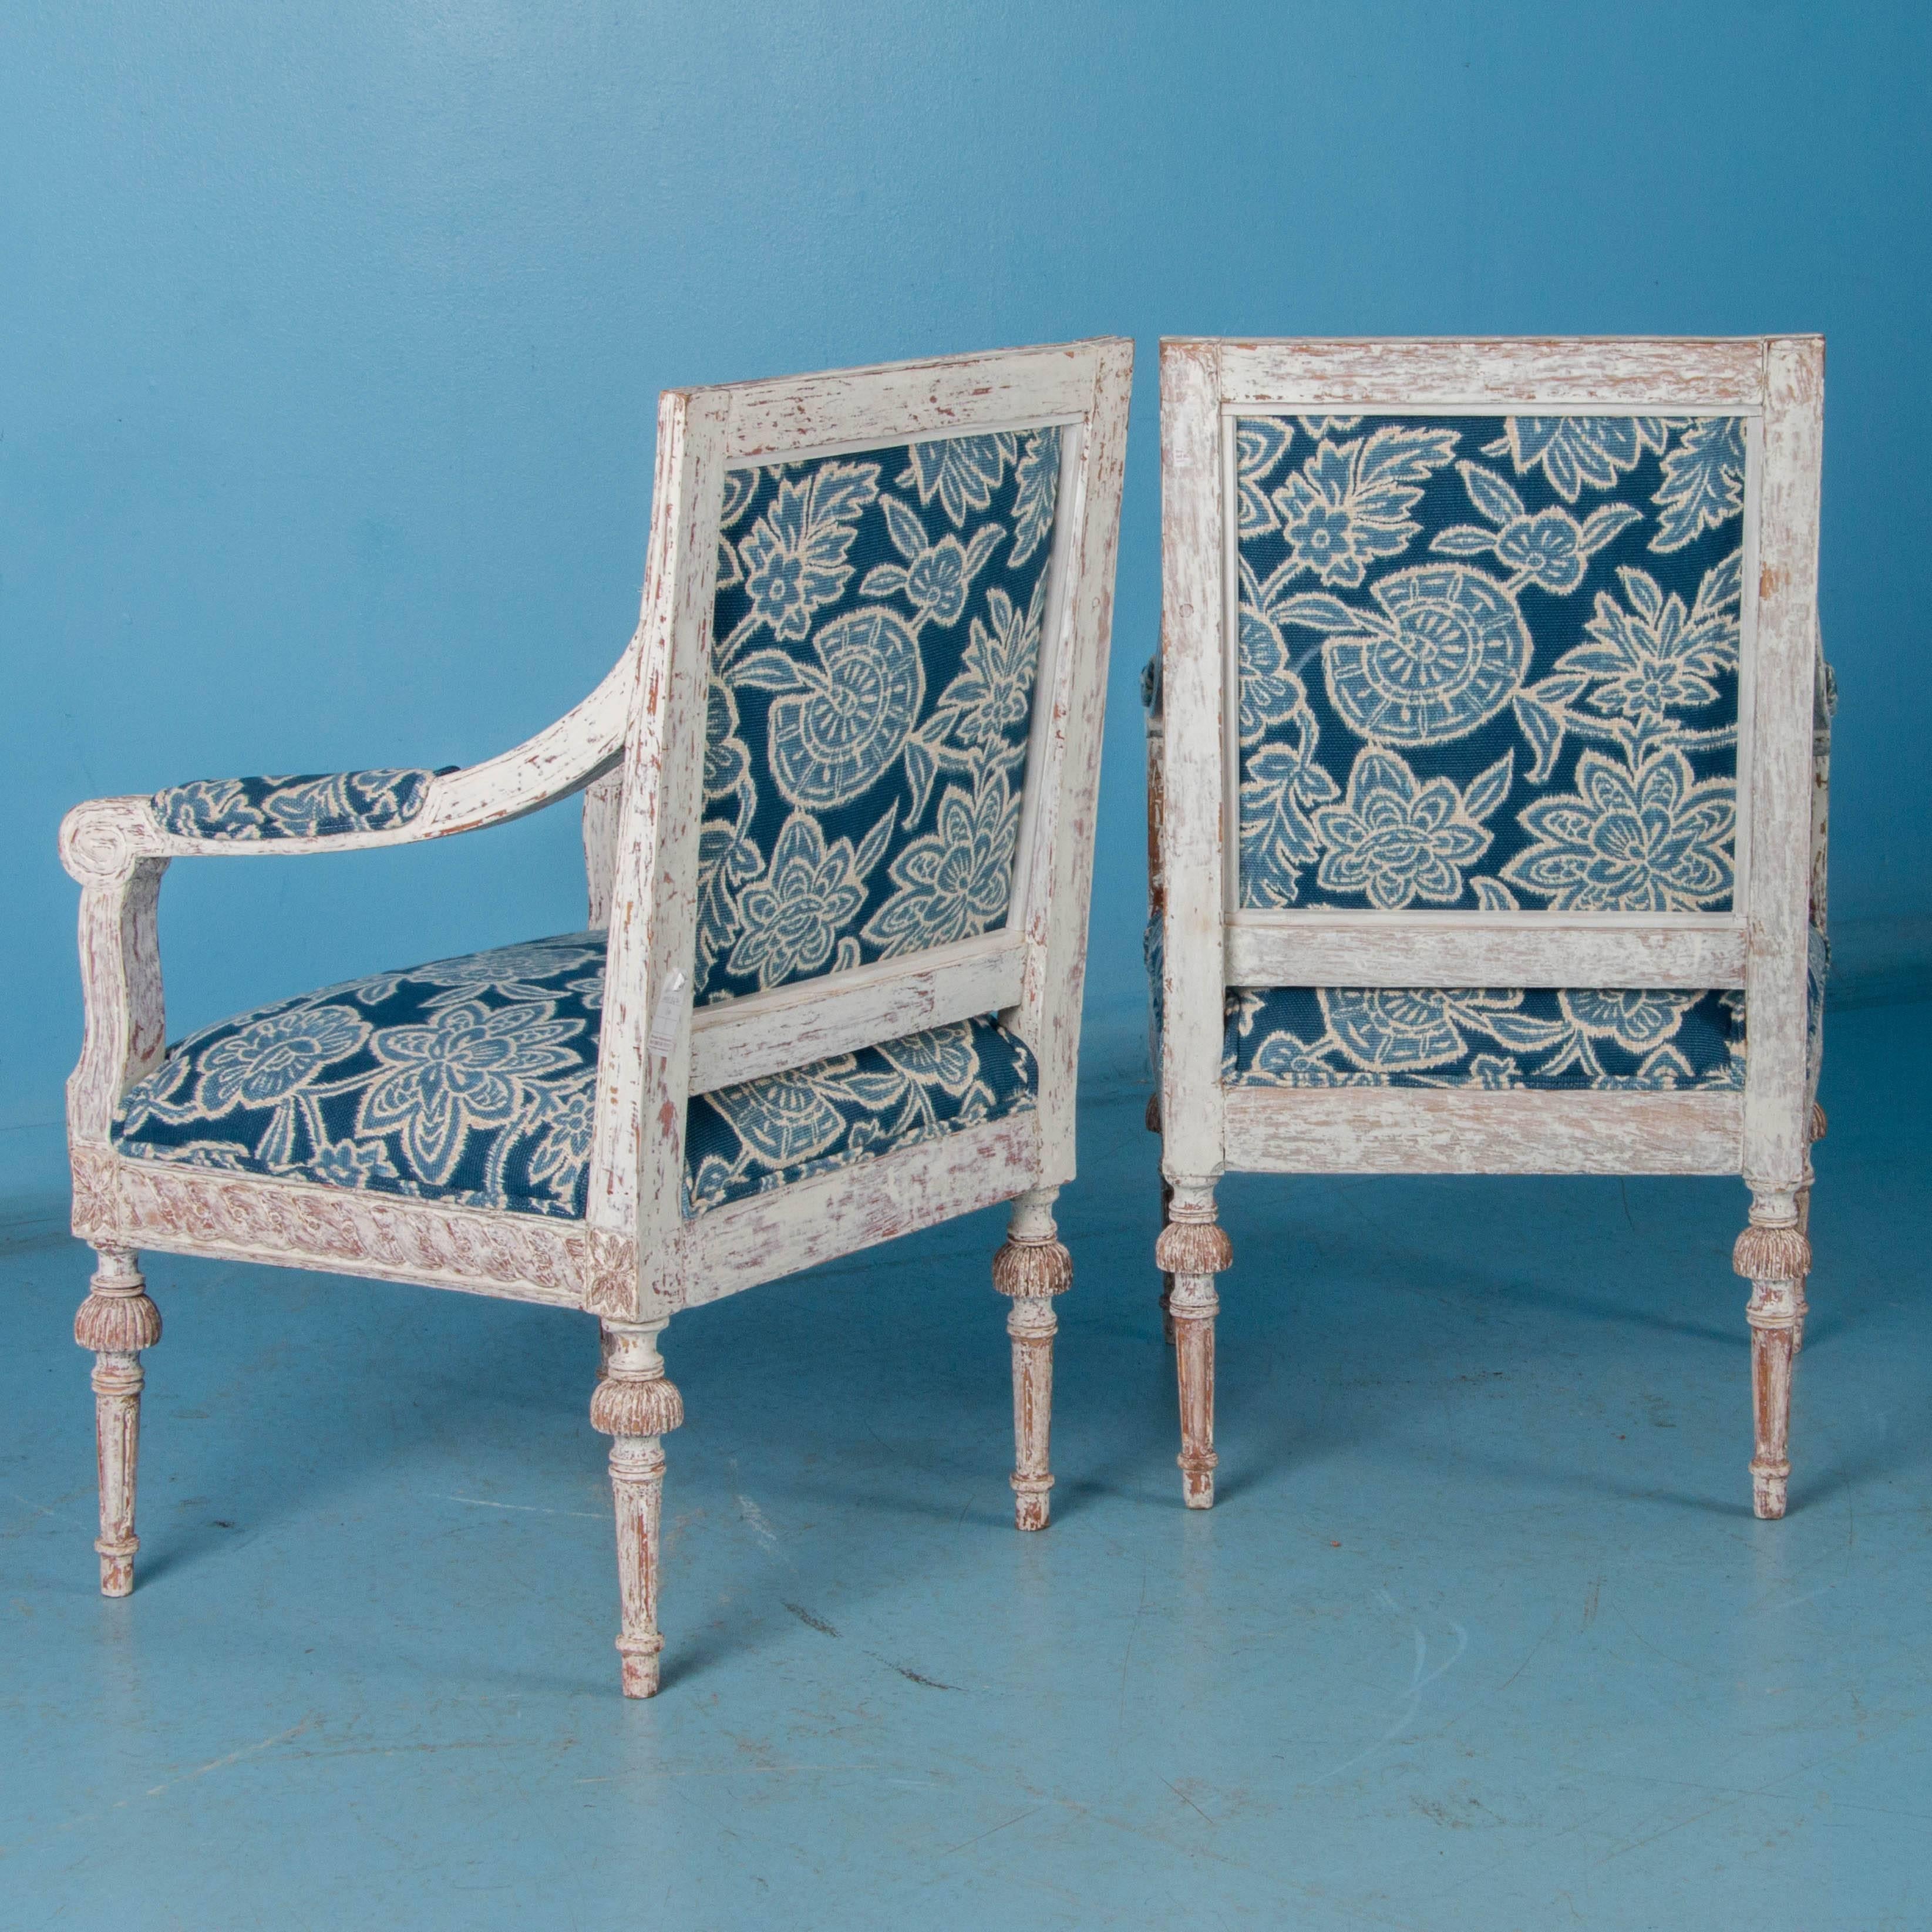 There is wonderful appeal to this this lovely pair of arm chairs which comes from a perfect blending of old and new. The enduring beauty of the original Gustavian style and craftsmanship is accentuated by the distressed white painted finish